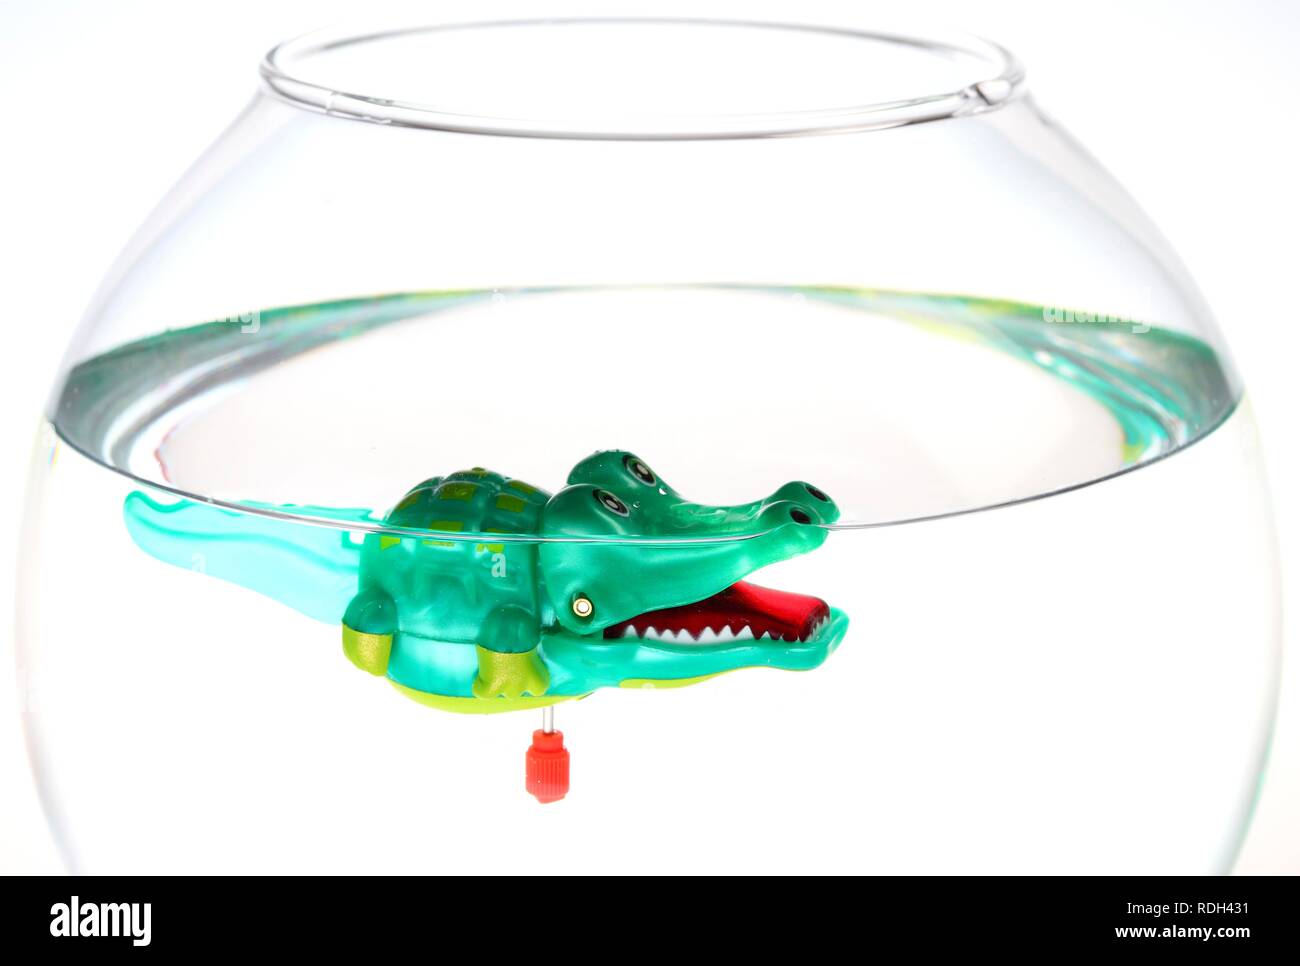 Wind-up water toys, crocodile in a fish bowl, illustration Stock Photo